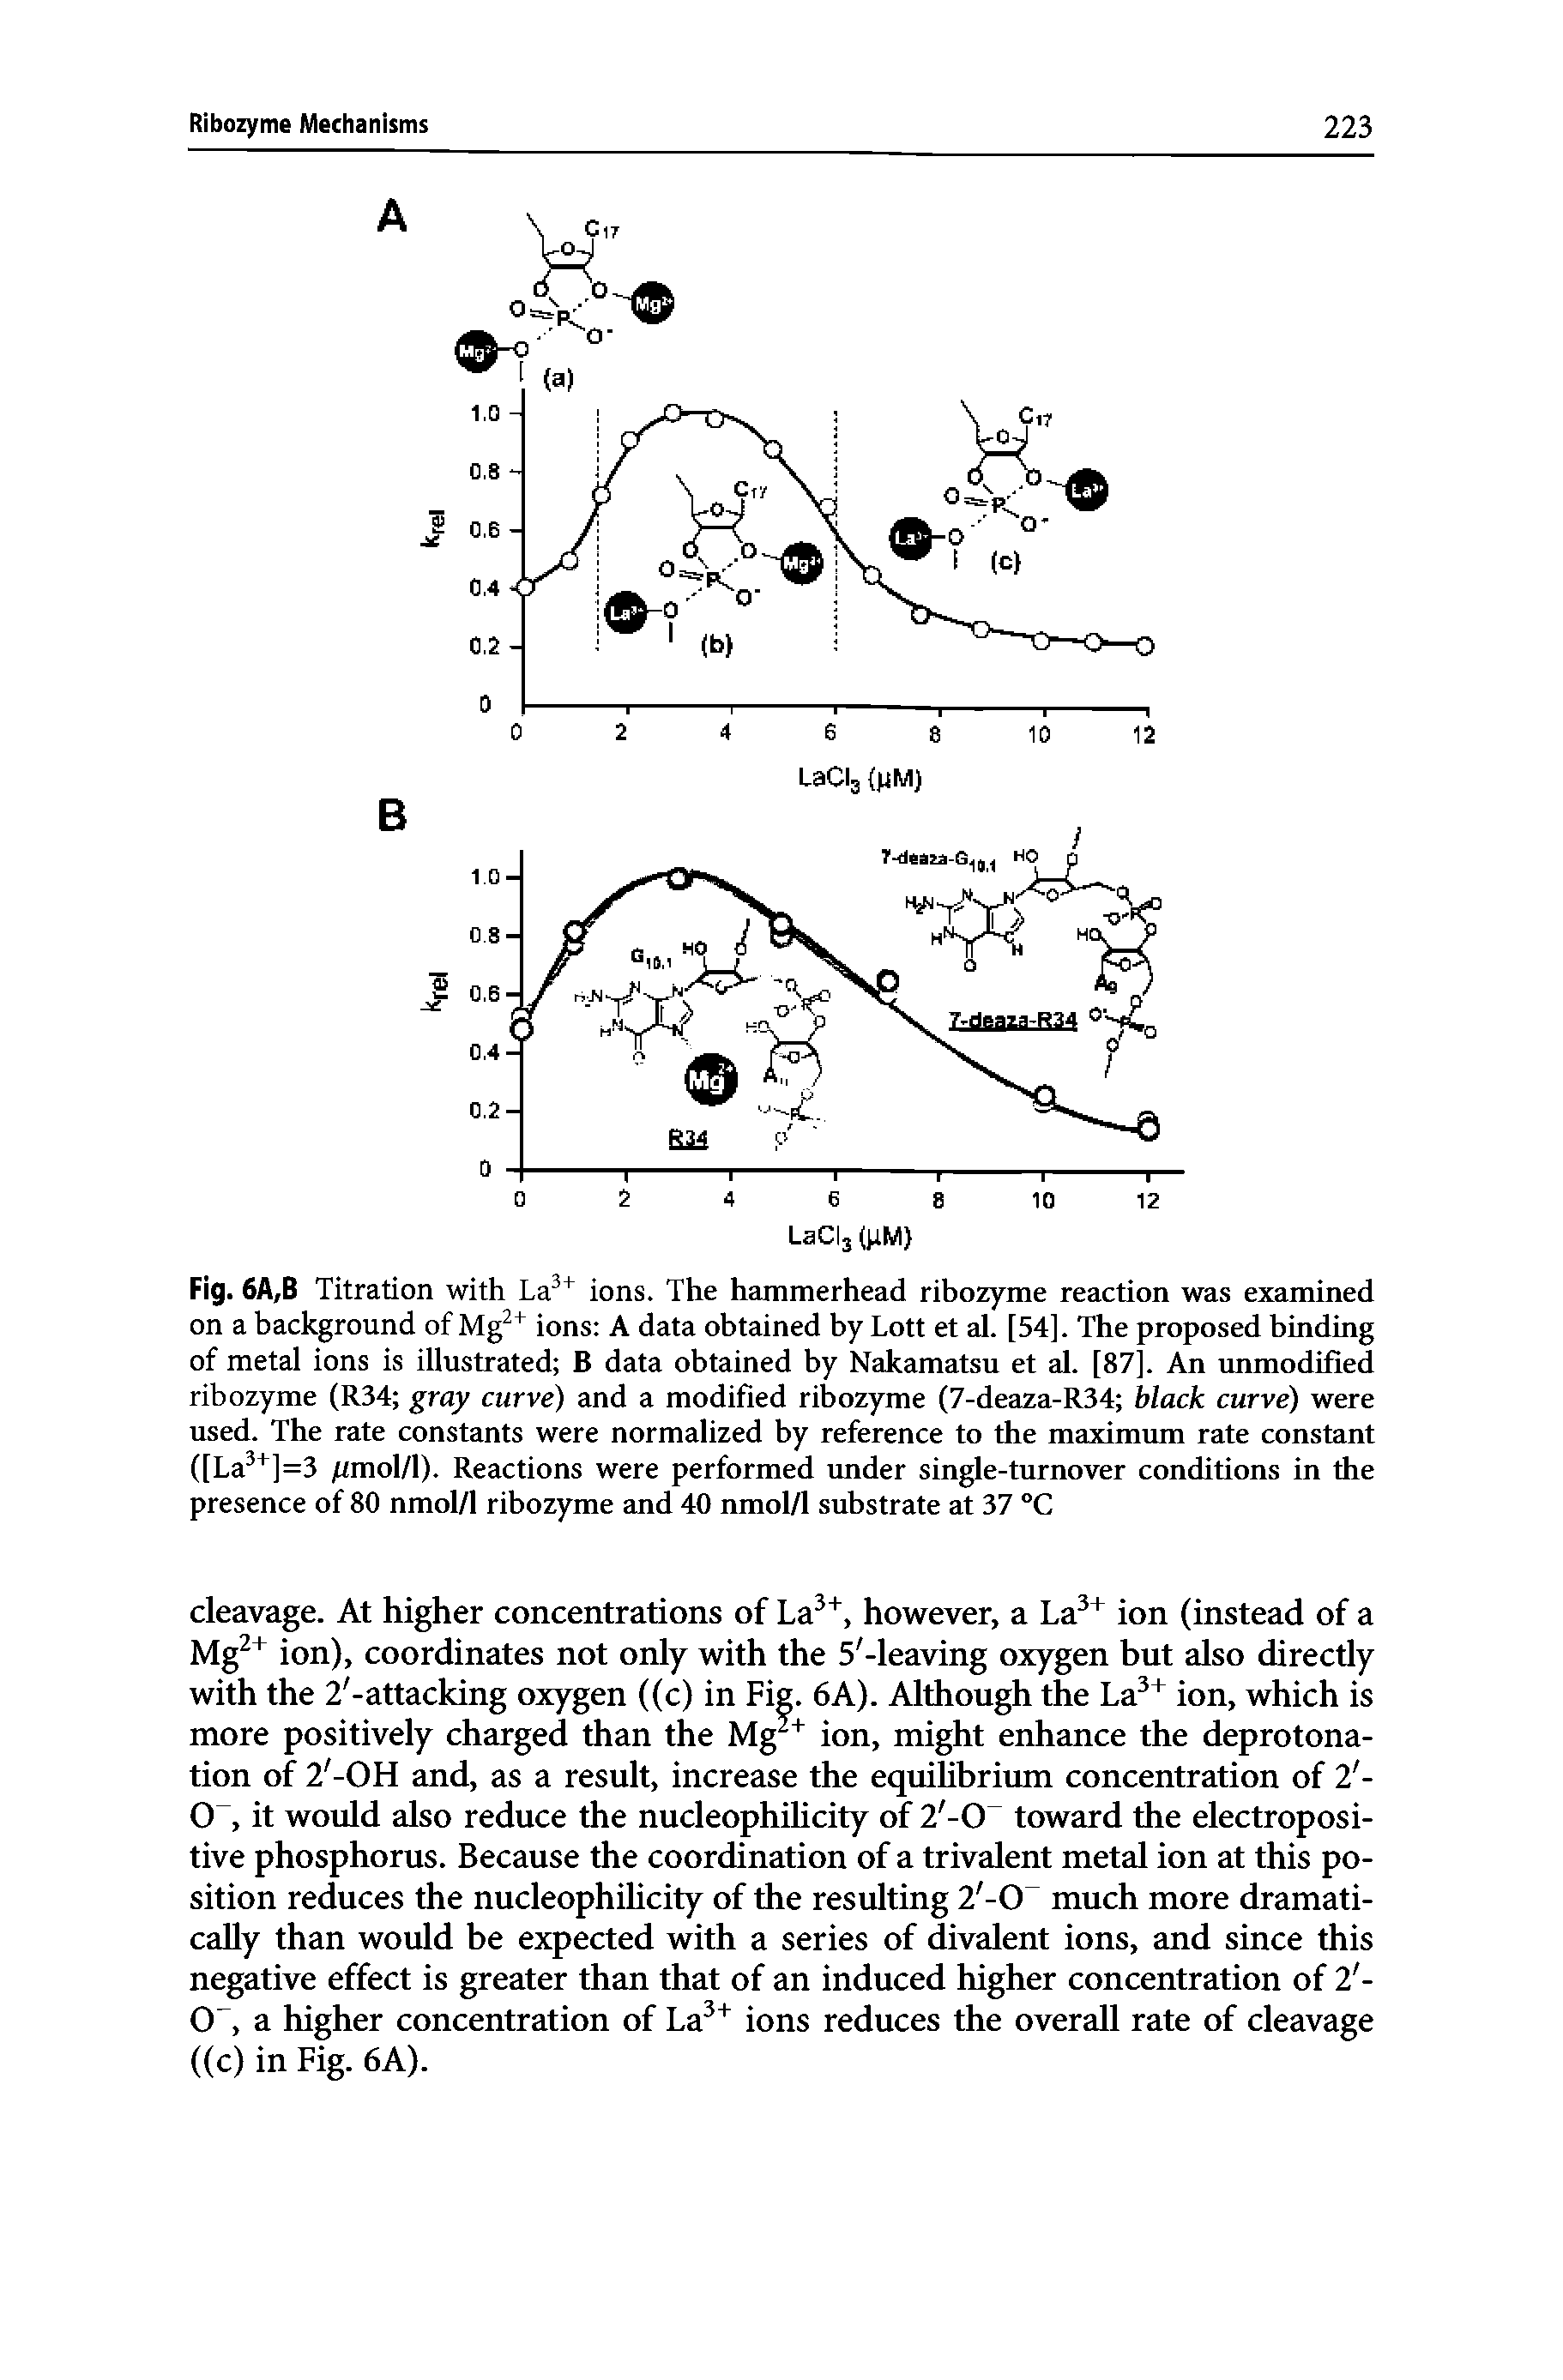 Fig. 6A,B Titration with ions. The hammerhead ribozyme reaction was examined on a background of ions A data obtained by Lott et al. [54]. The proposed binding of metal ions is illustrated B data obtained by Nakamatsu et al. [87]. An unmodified ribozyme (R34 gray curve) and a modified ribozyme (7-deaza-R34 black curve) were used. The rate constants were normalized by reference to the maximum rate constant ([La ]=3 (mol/1). Reactions were performed under single-turnover conditions in the presence of 80 nmol/1 ribozyme and 40 nmol/1 substrate at 37 °C...